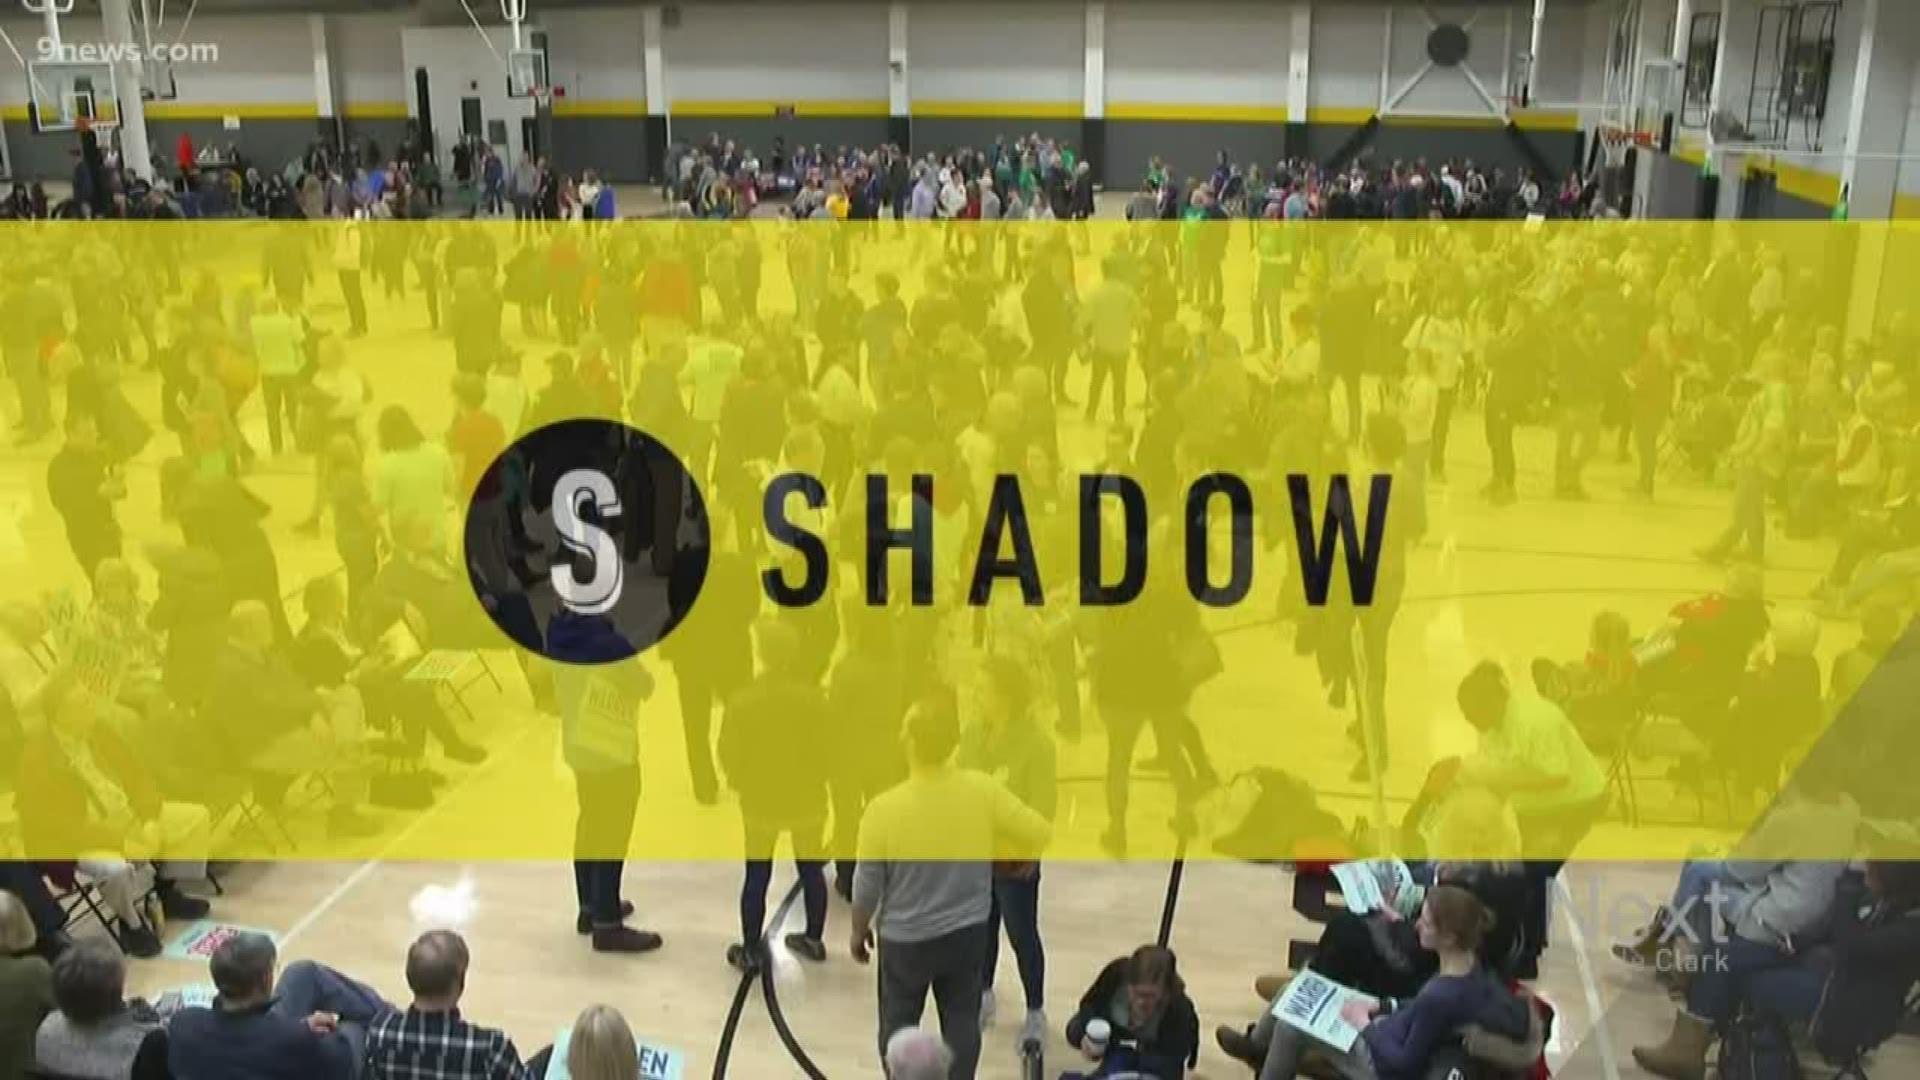 A smartphone app from a company called Shadow may be the reason Iowa caucus results were delayed. Documents filed in 2019 show a Denver address for the CEO.